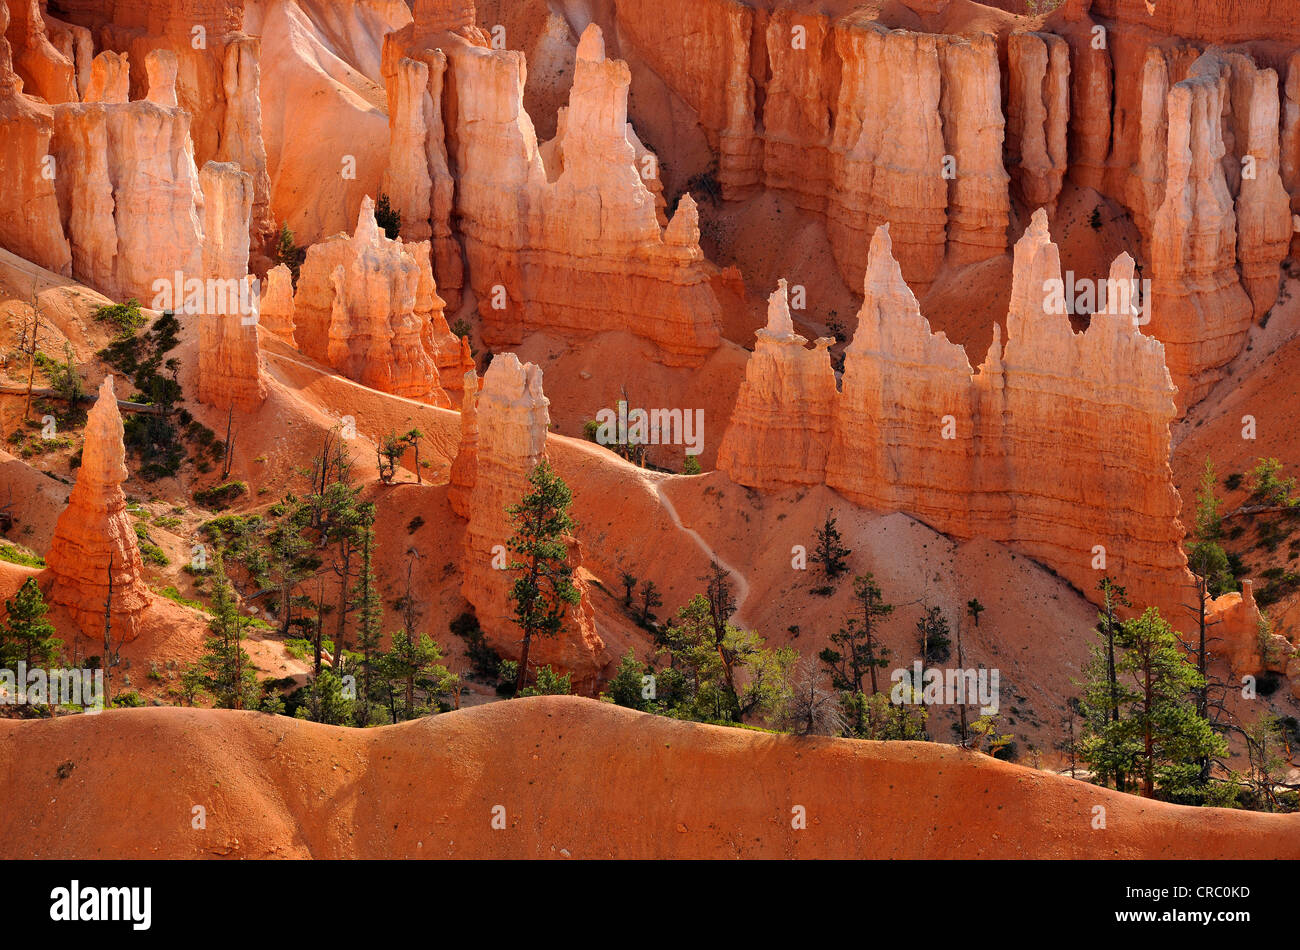 La reine Victoria rock formation, Queens Garden Trail, Sunset Point, Bryce Canyon National Park, Utah, United States of America Banque D'Images